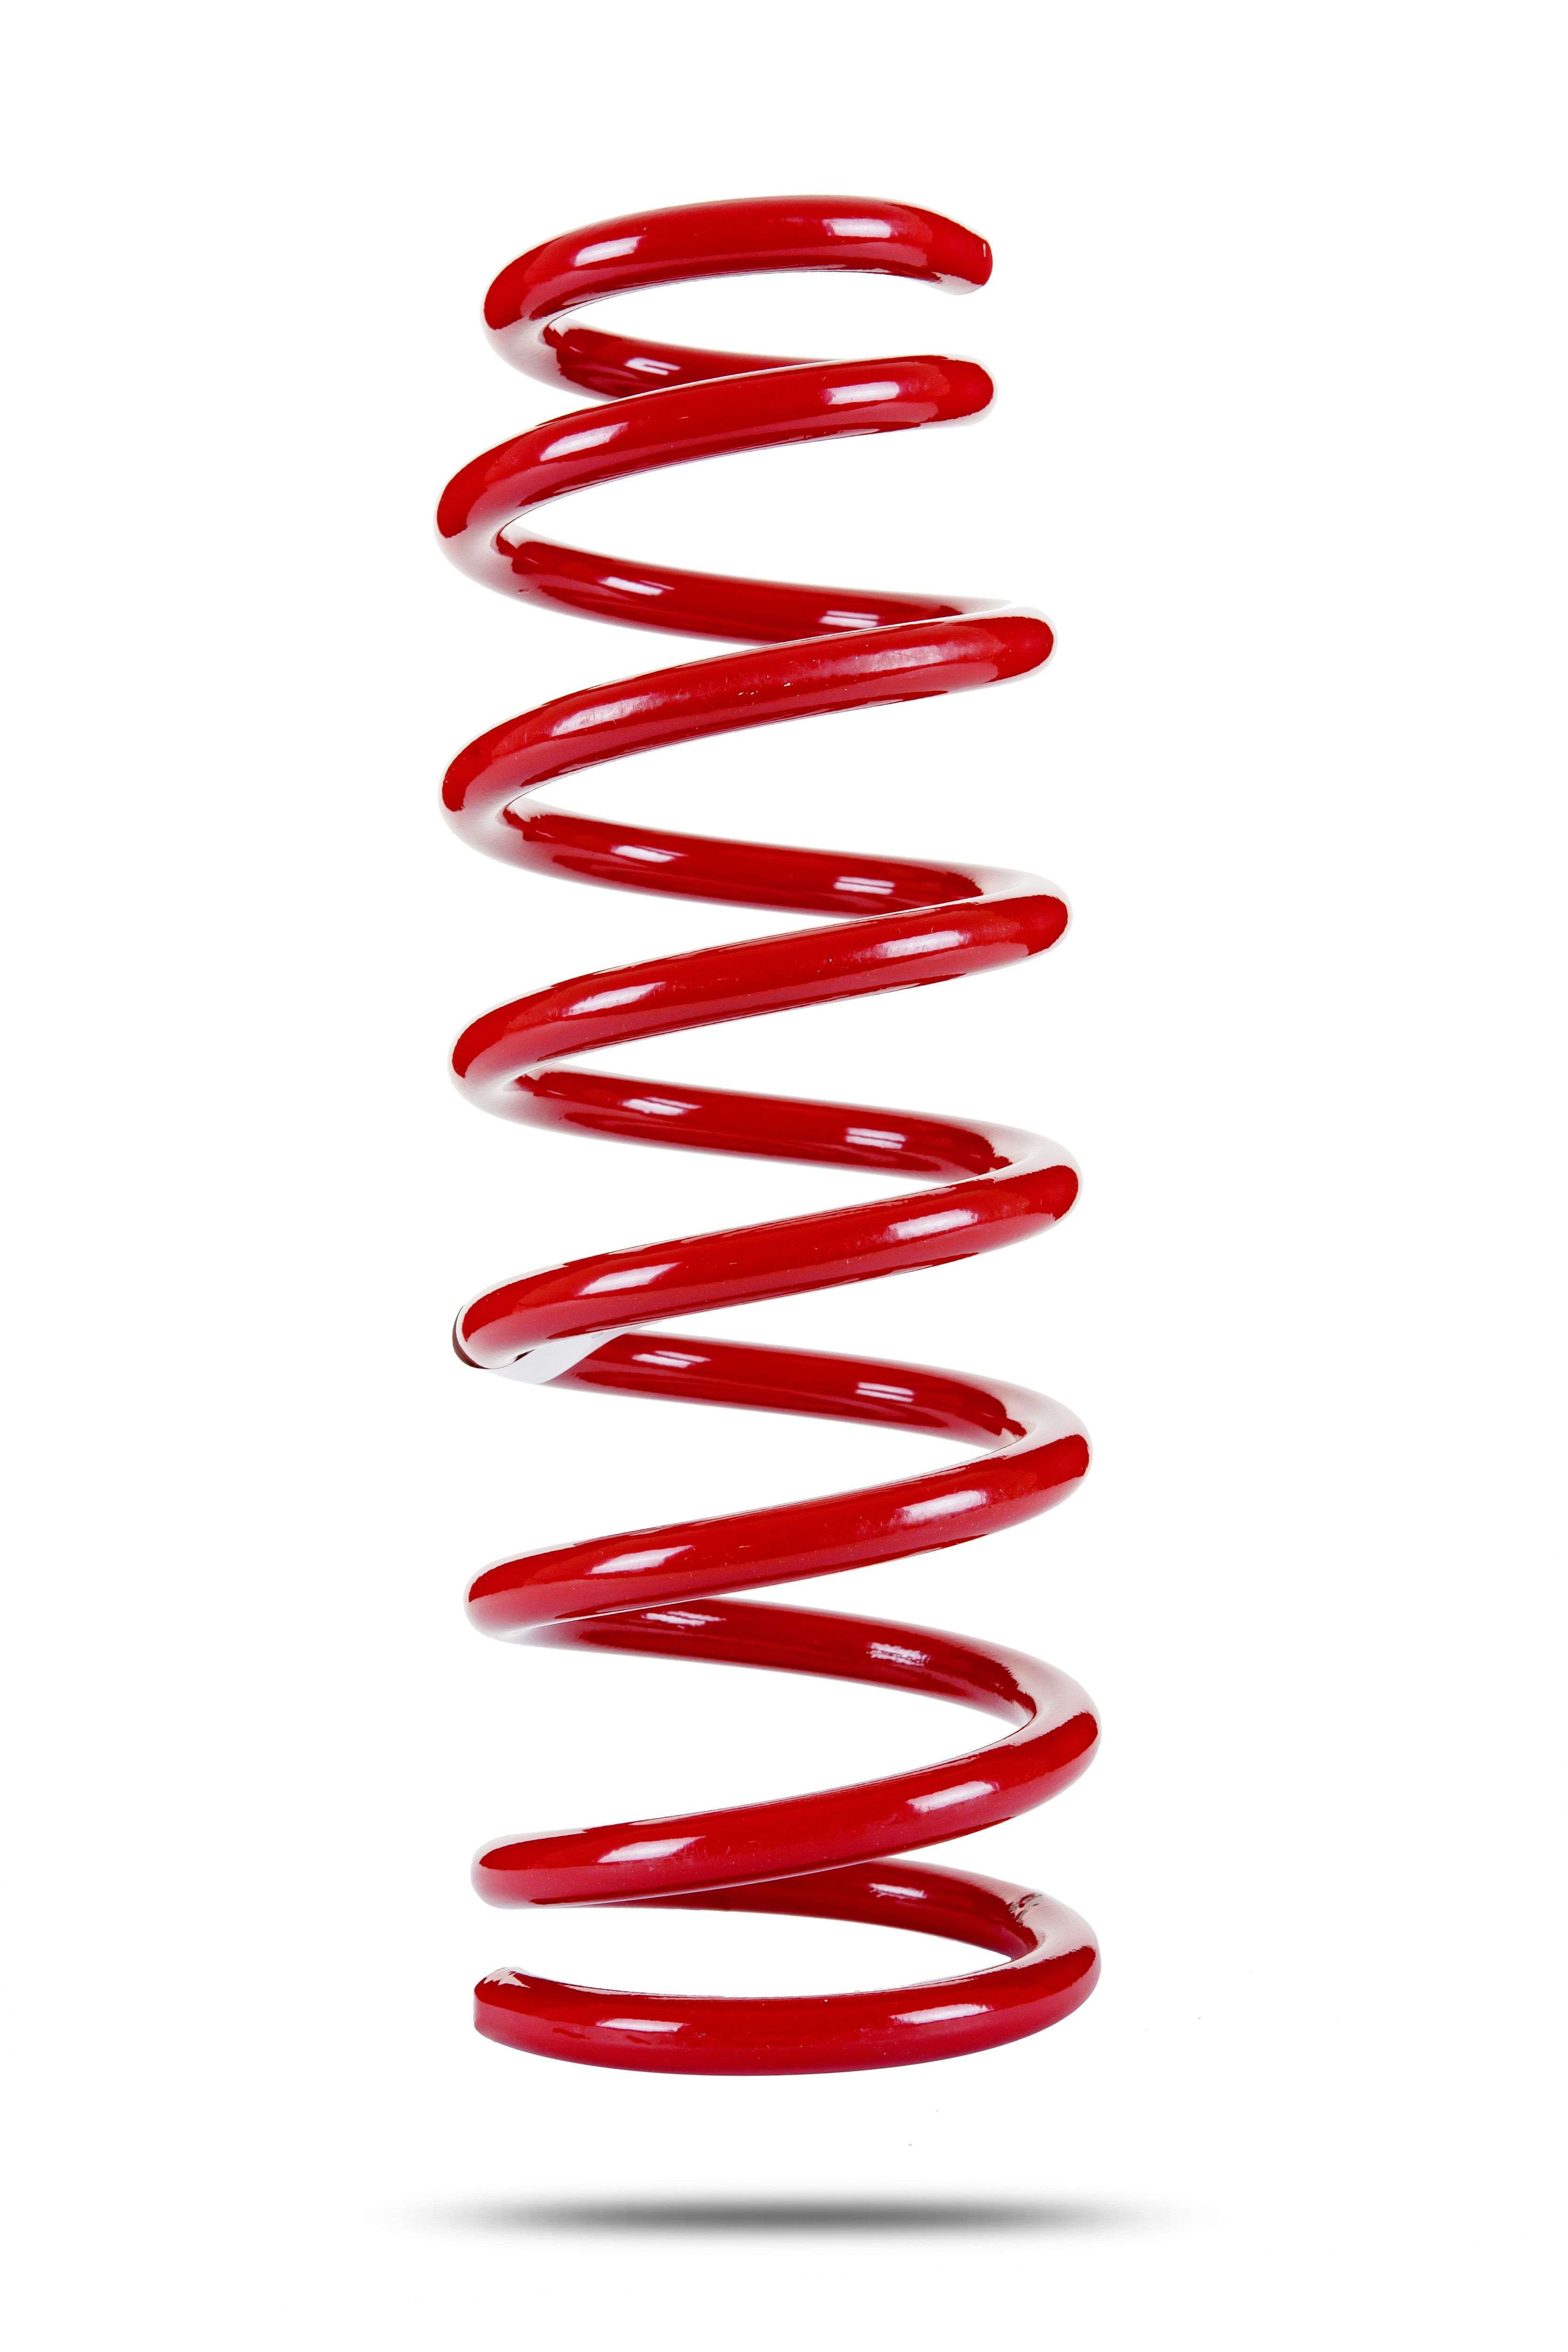 2012-2014 Dodge Charger SRT8 Pedders Coil Spring Front 2PC - PED-7940